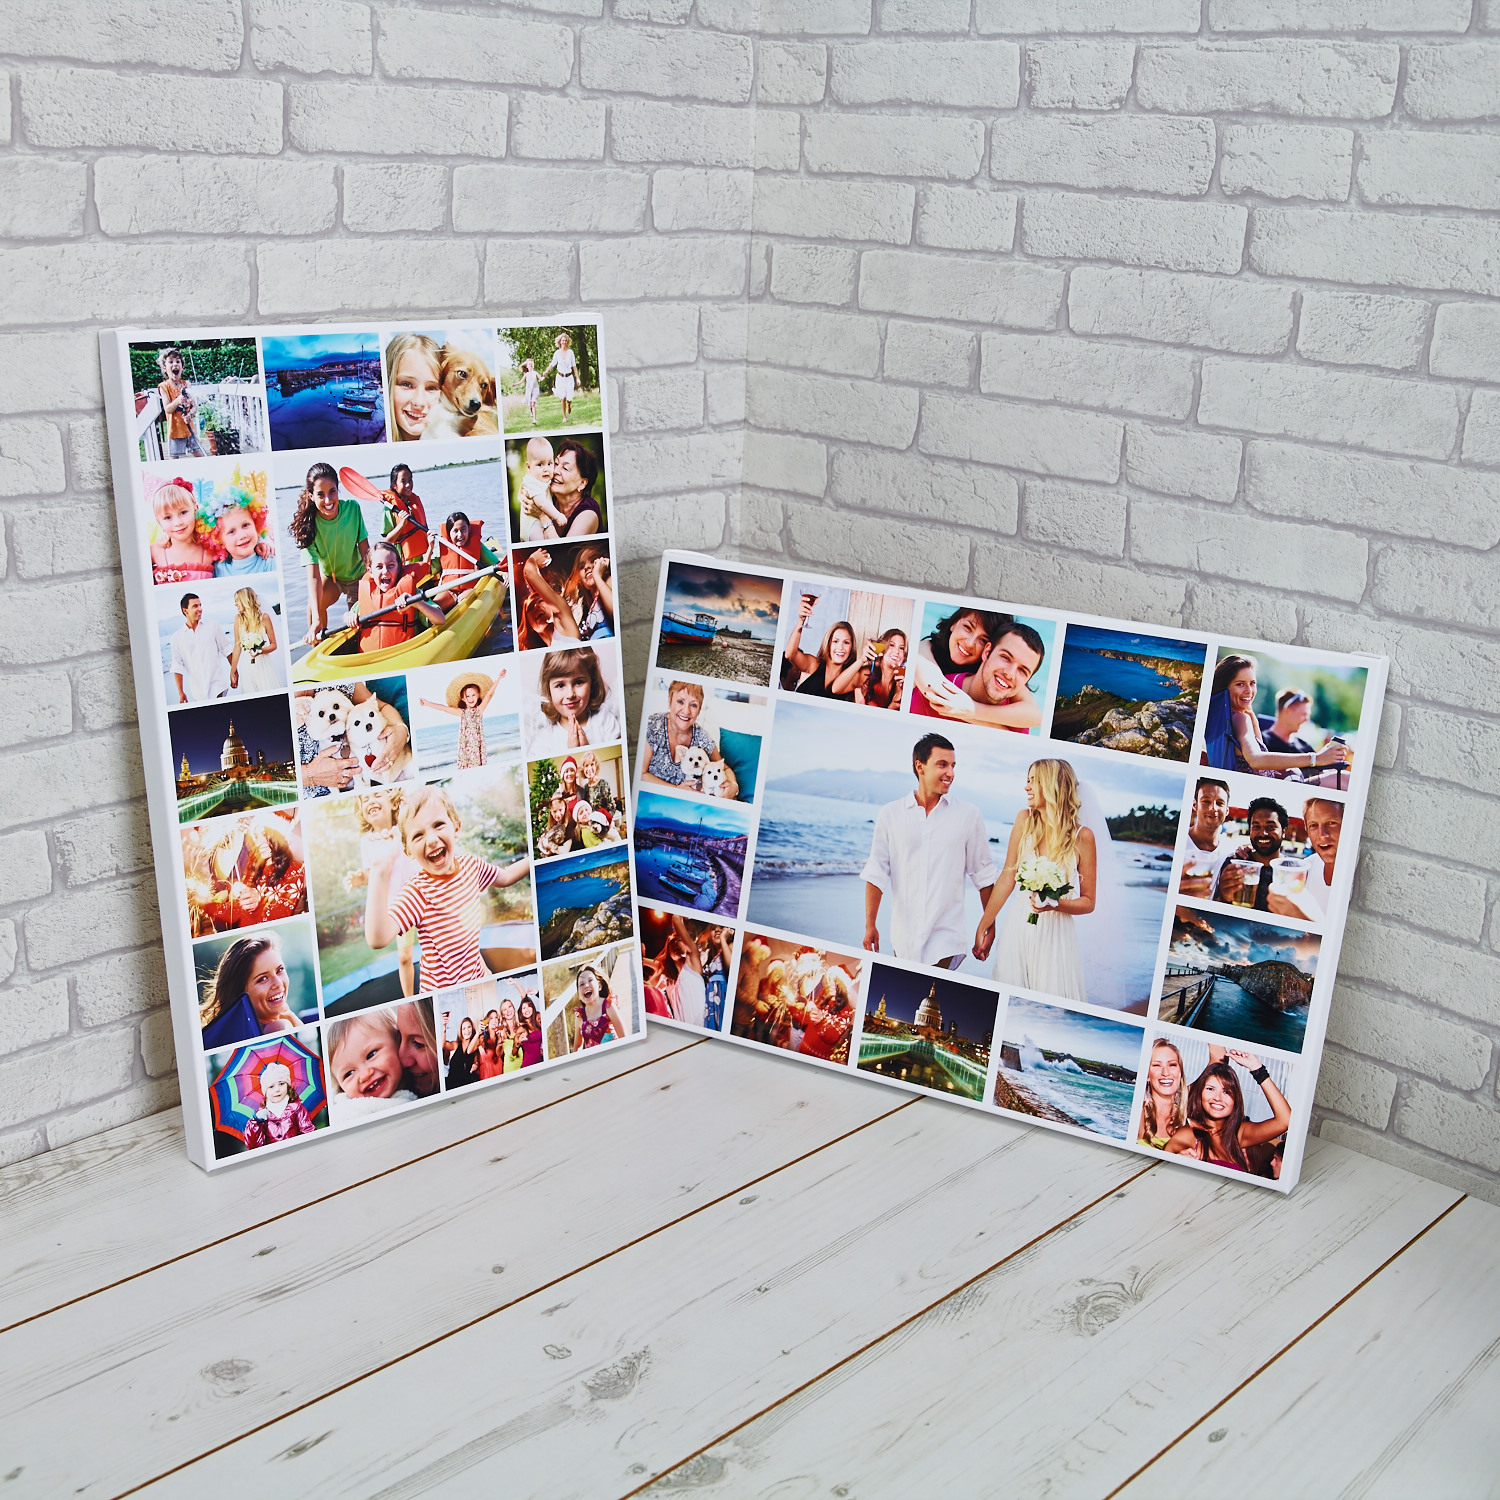 How To Make A Printable Photo Collage